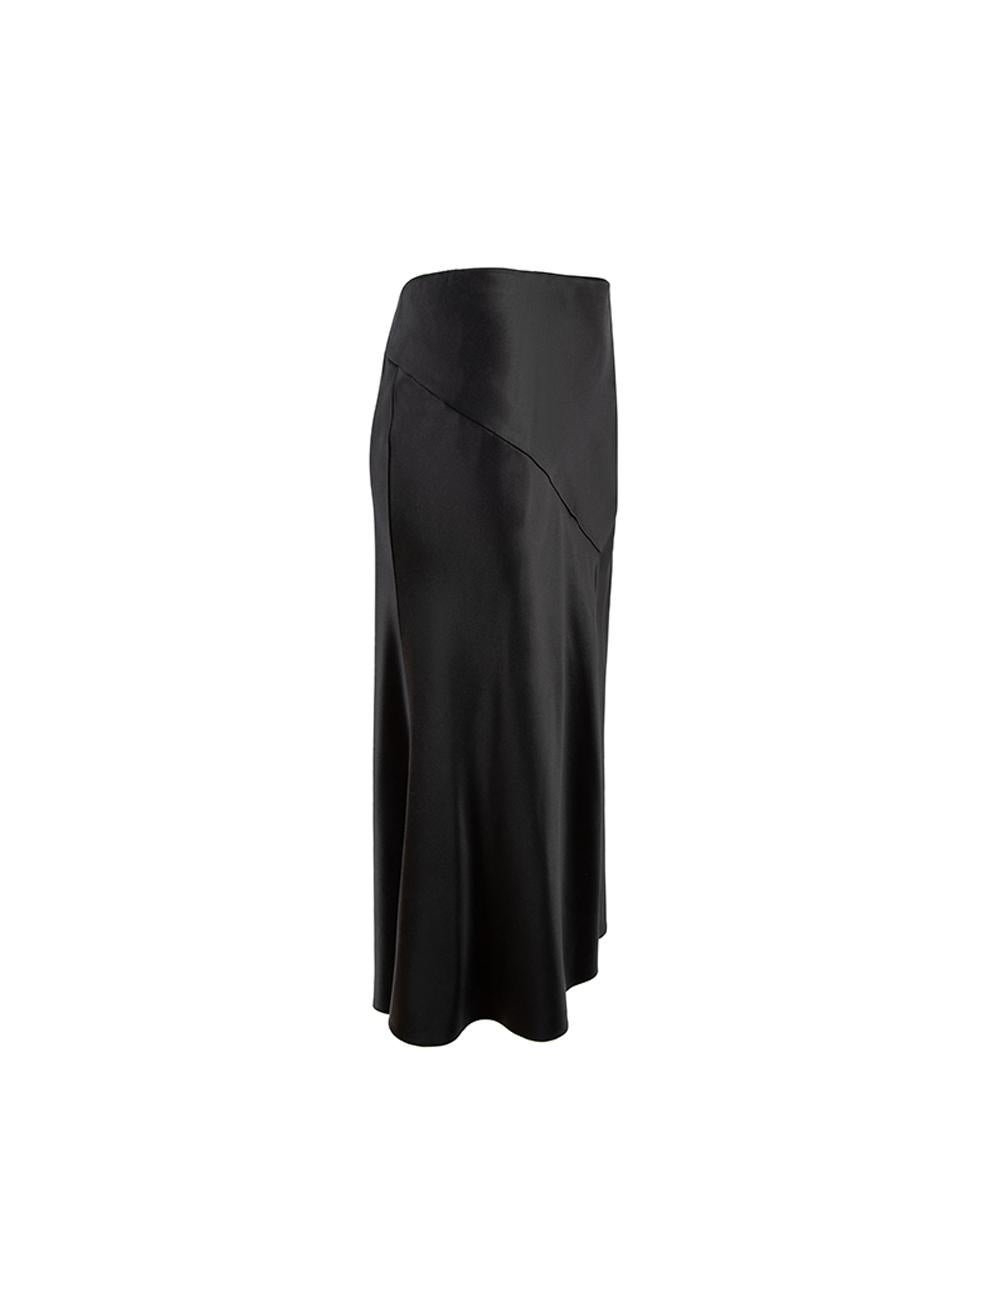 CONDITION is Very good. Minimal wear to skirt is evident. Minimal wear to the outer silk on this used Jason Wu designer resale item. Details Black Silk Slip skirt Midi length Side zip closure with clasp Fully lined Made in USA Composition 100% Silk